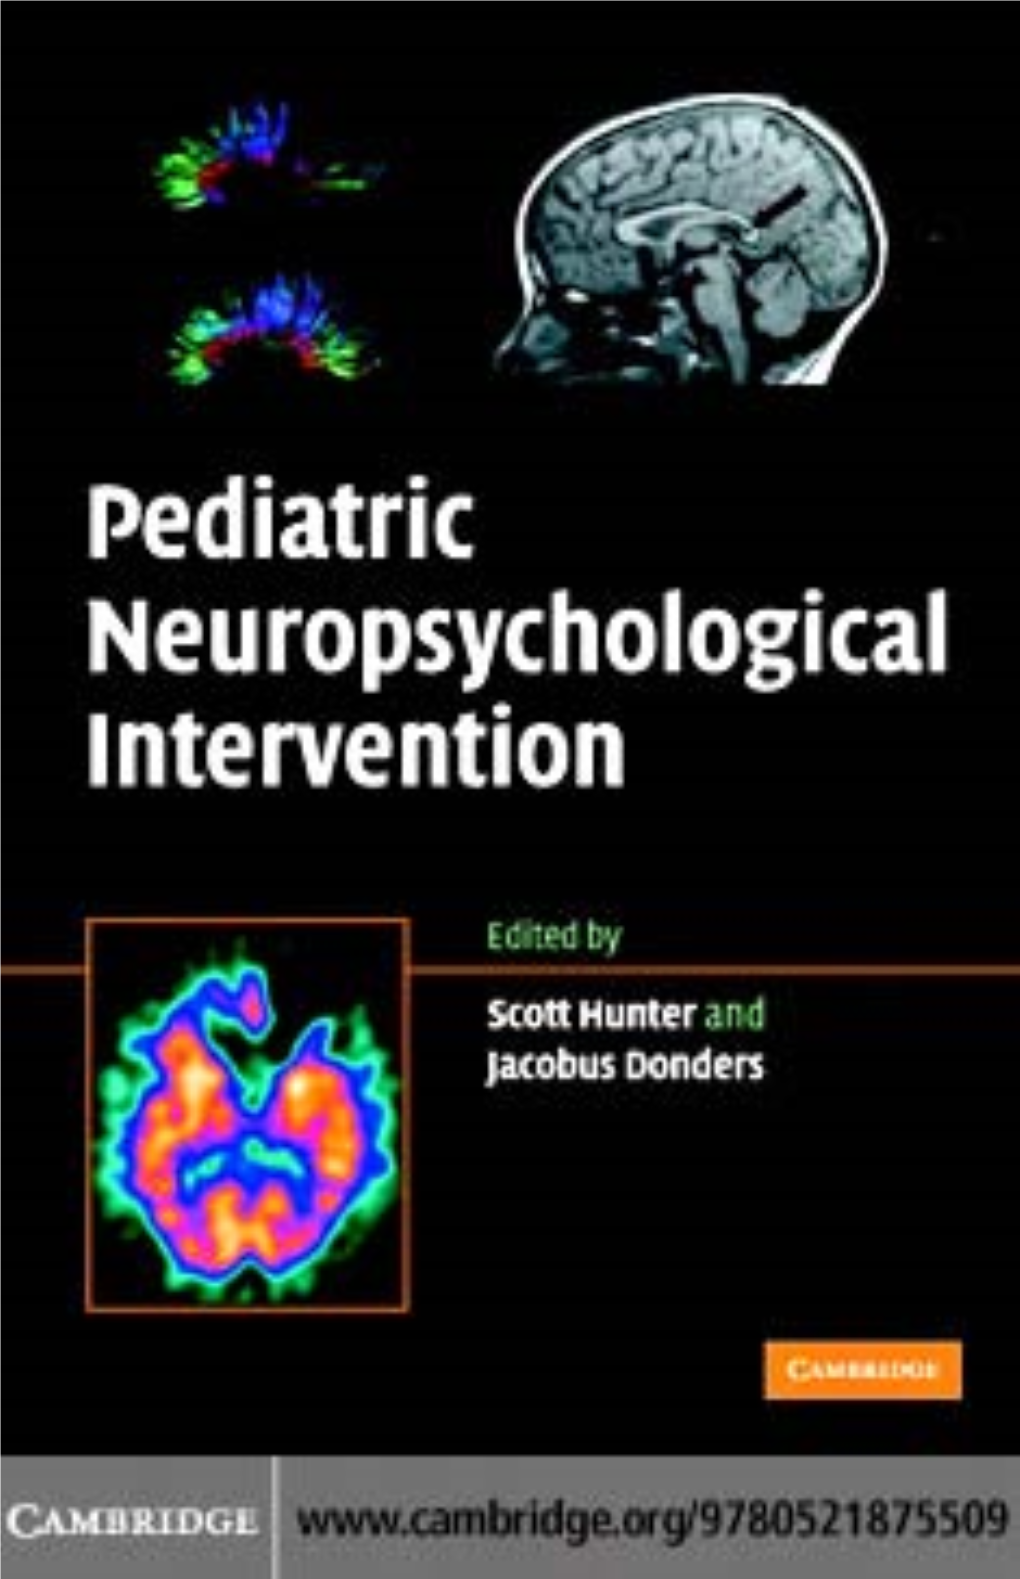 Pediatric Neuropsychological Intervention: a Critical Review Of